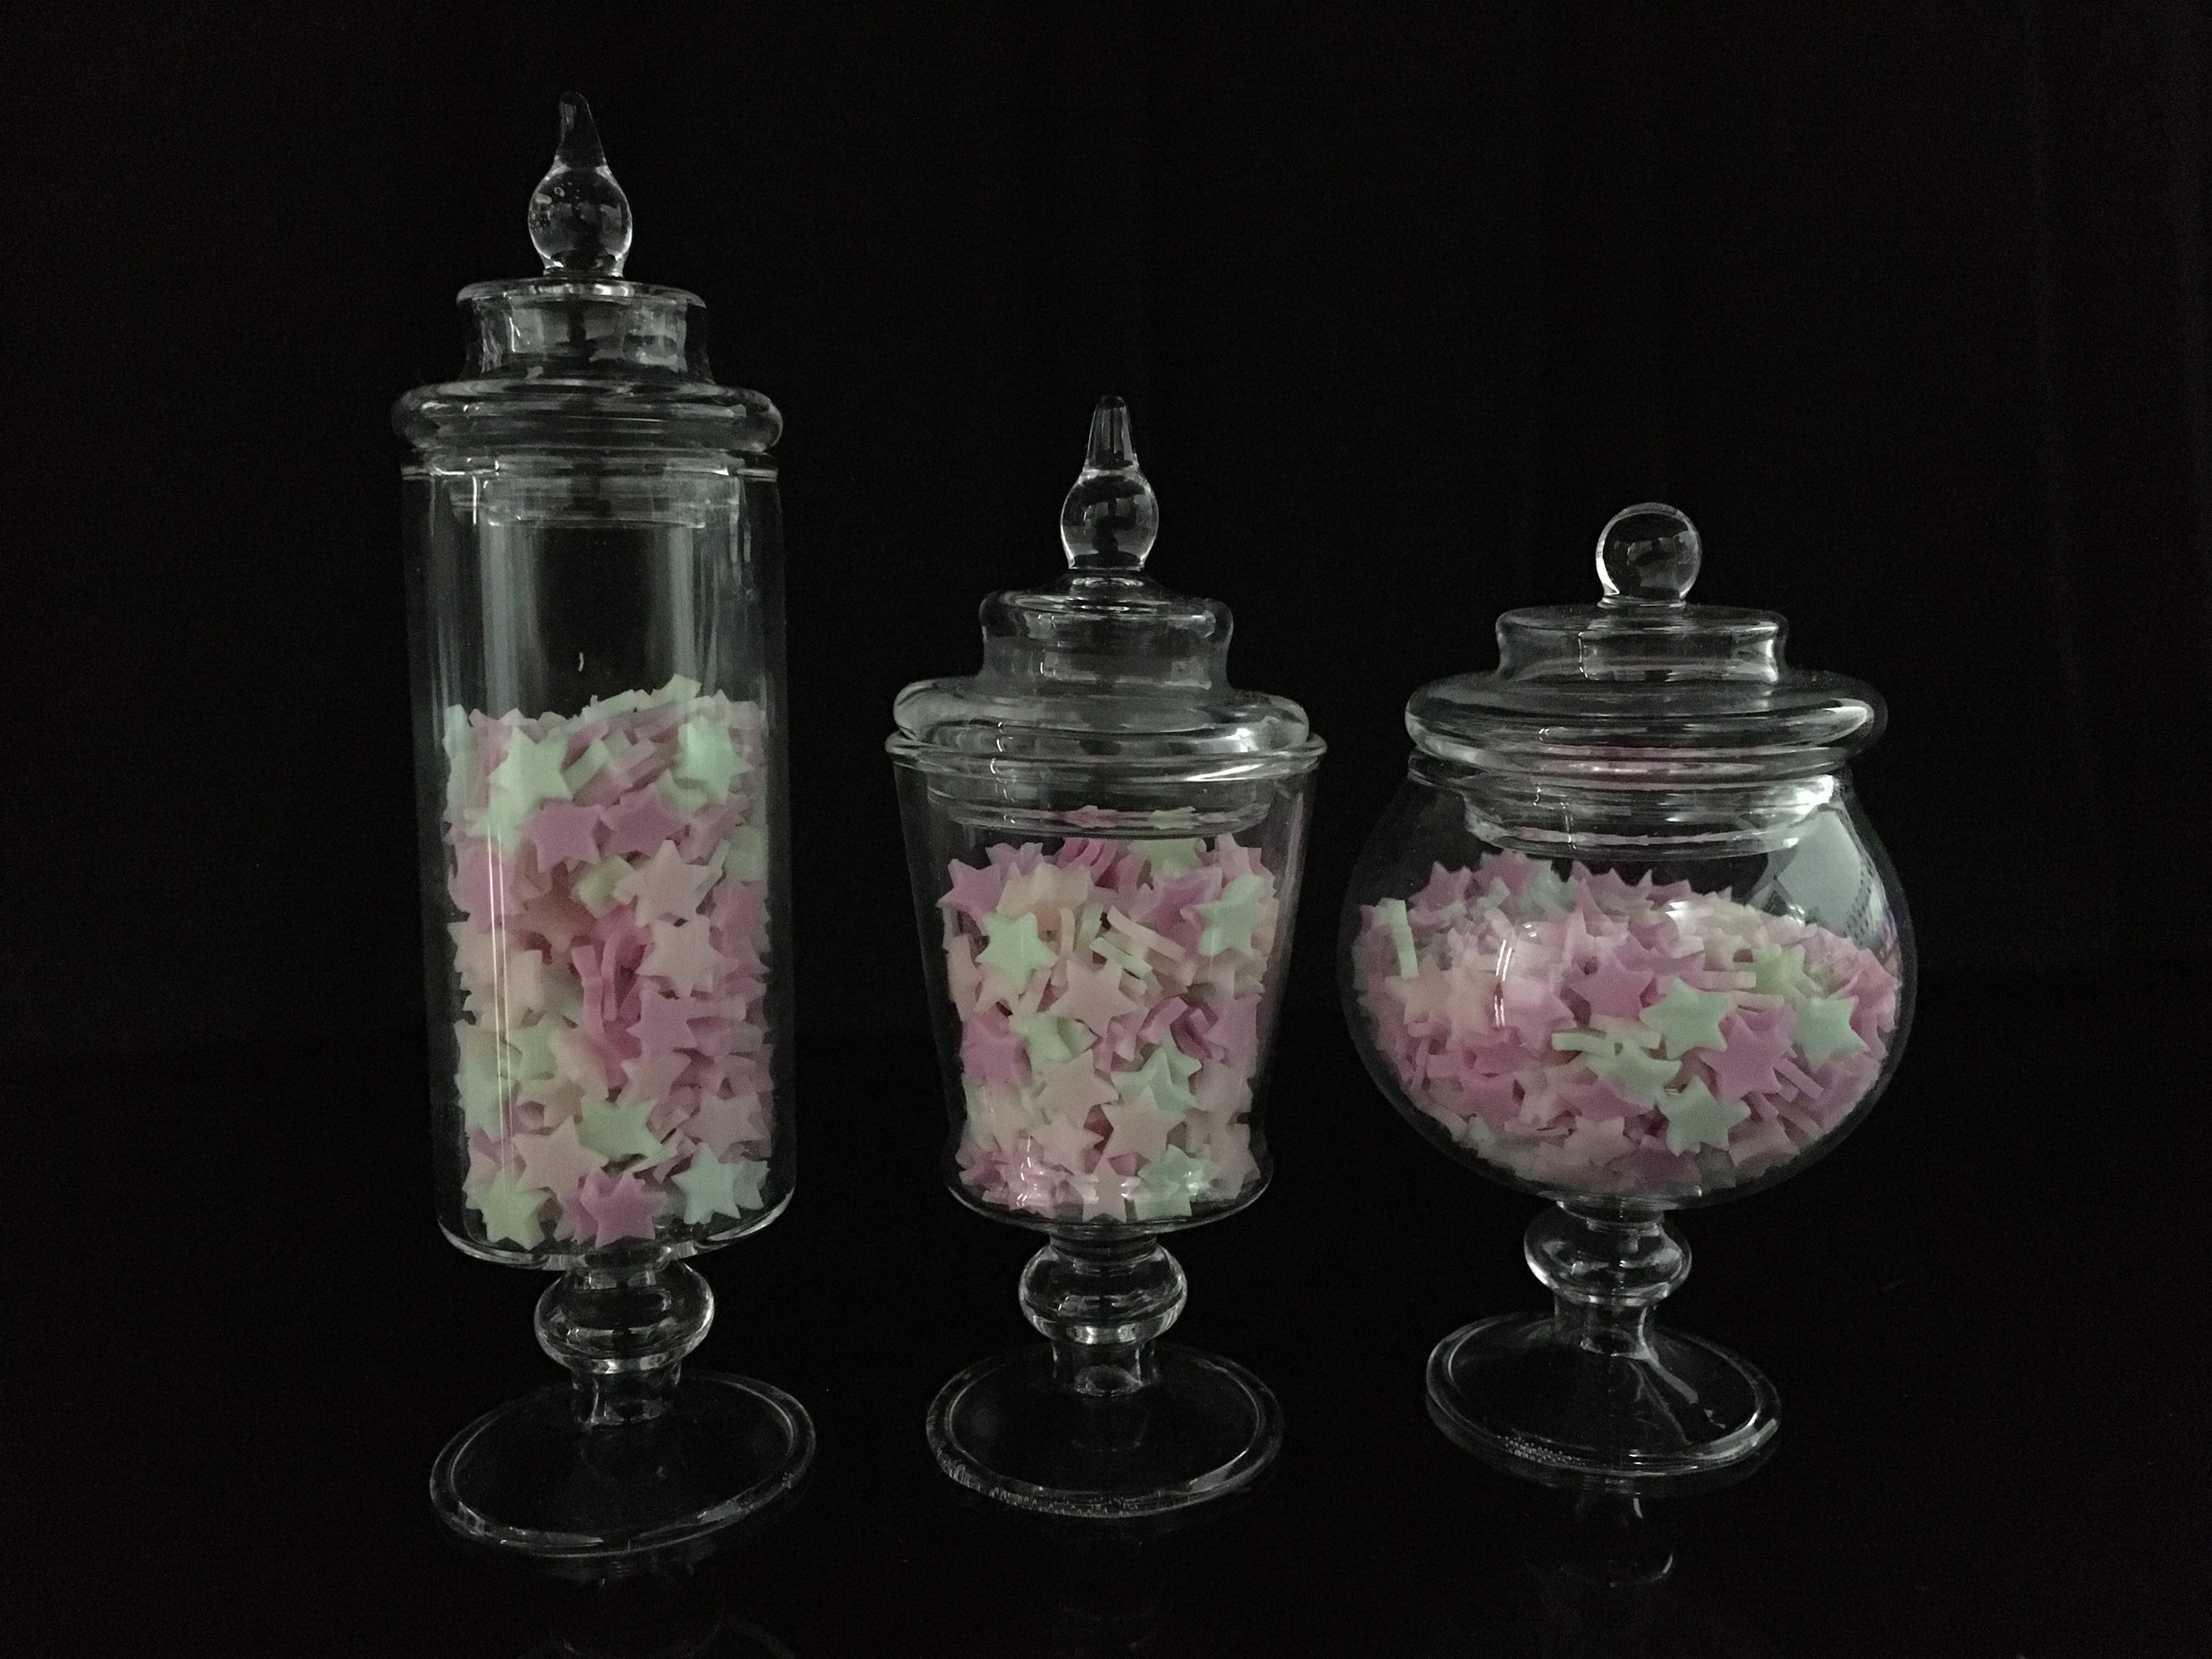 Dollhouse Miniature Real Glass Candy Jar 1/6 Scale Apothecary Jars With Lid  Miniature Storage Glassware for Doll House 